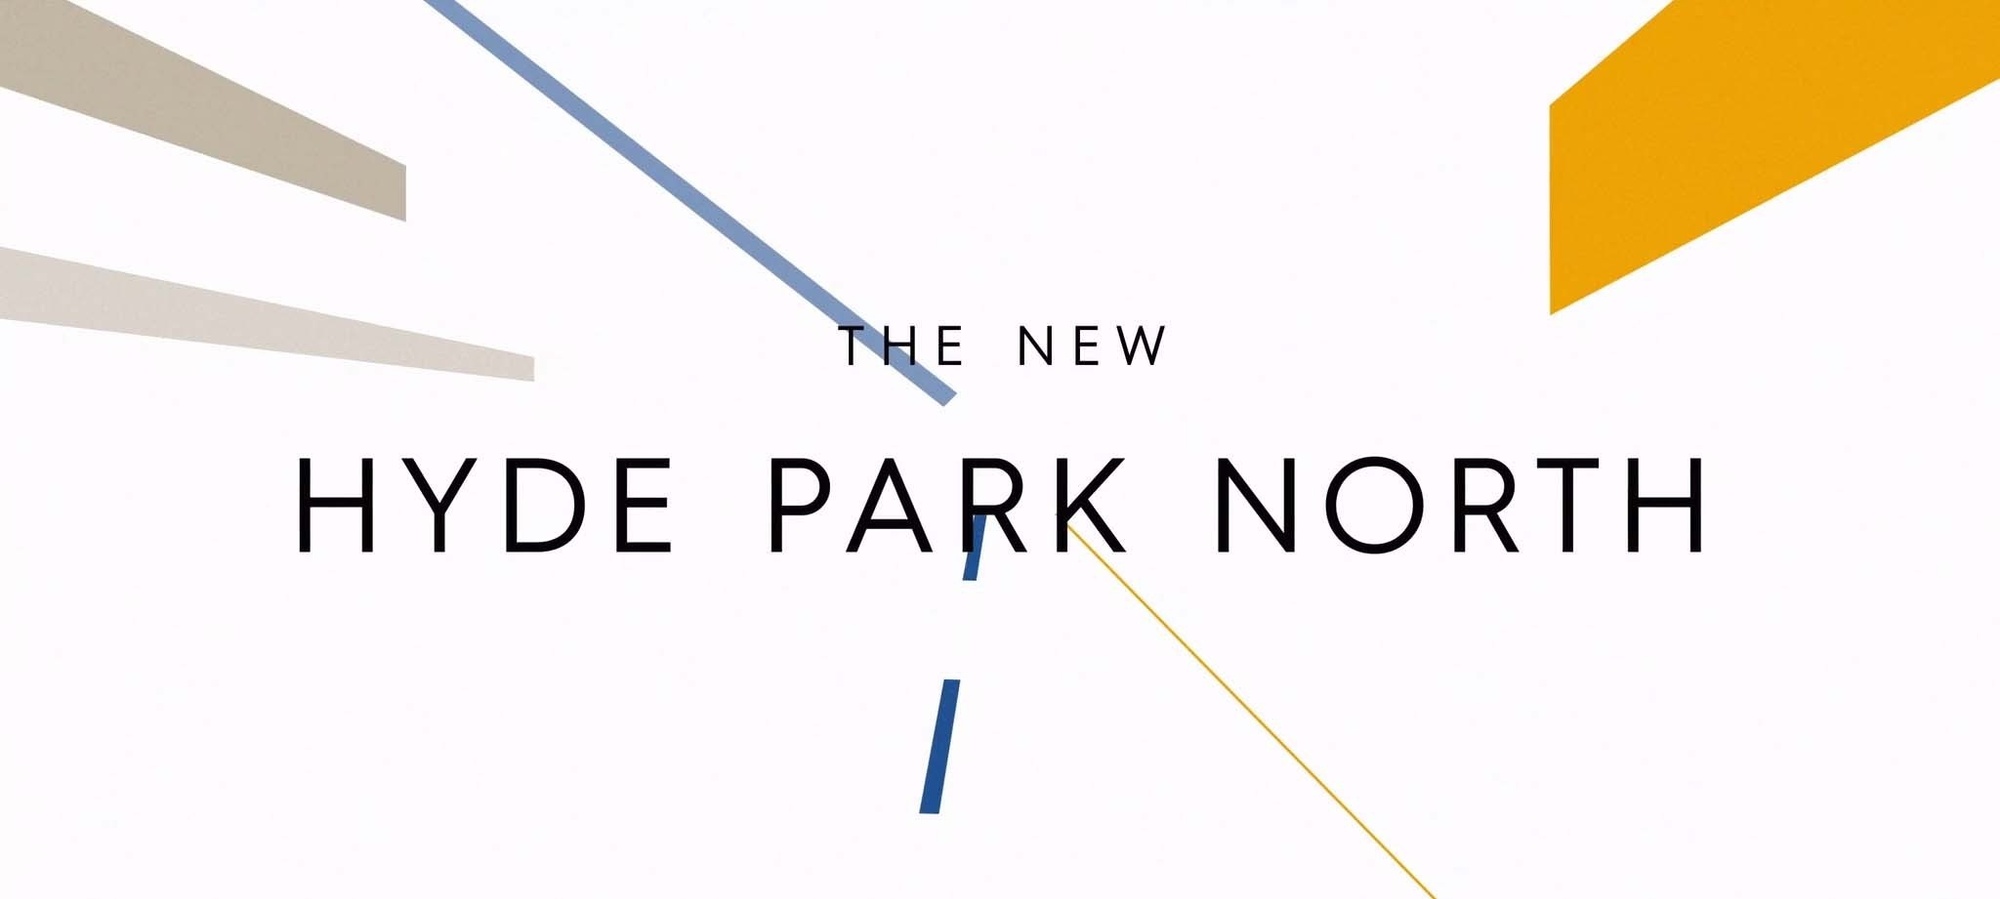 Still from advertisement film of the space, saying "The New Hyde Park North"